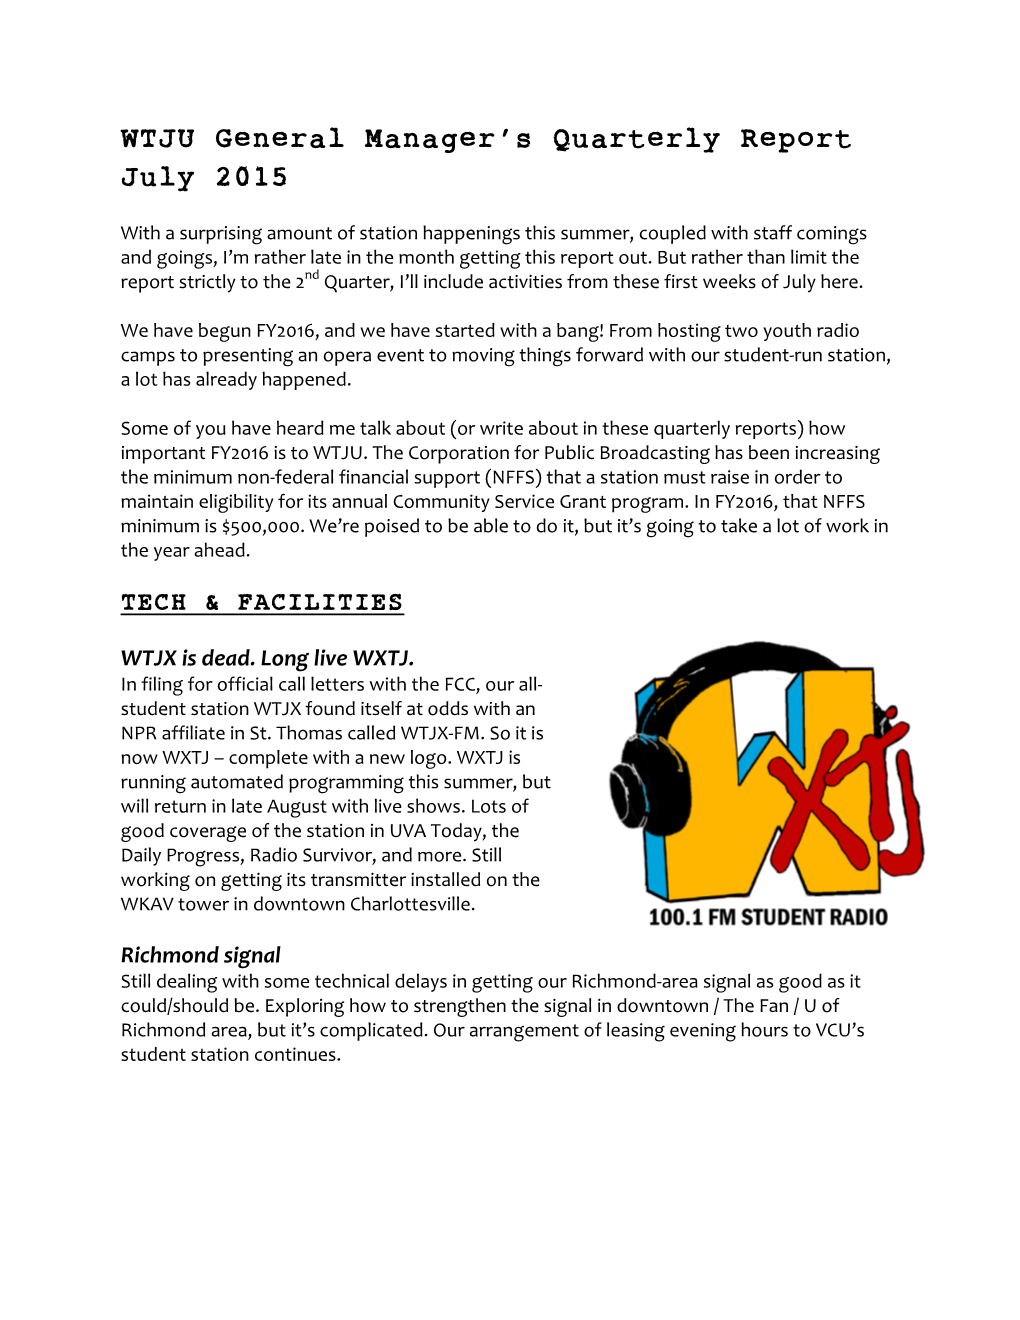 WTJU General Manager's Quarterly Report July 2015